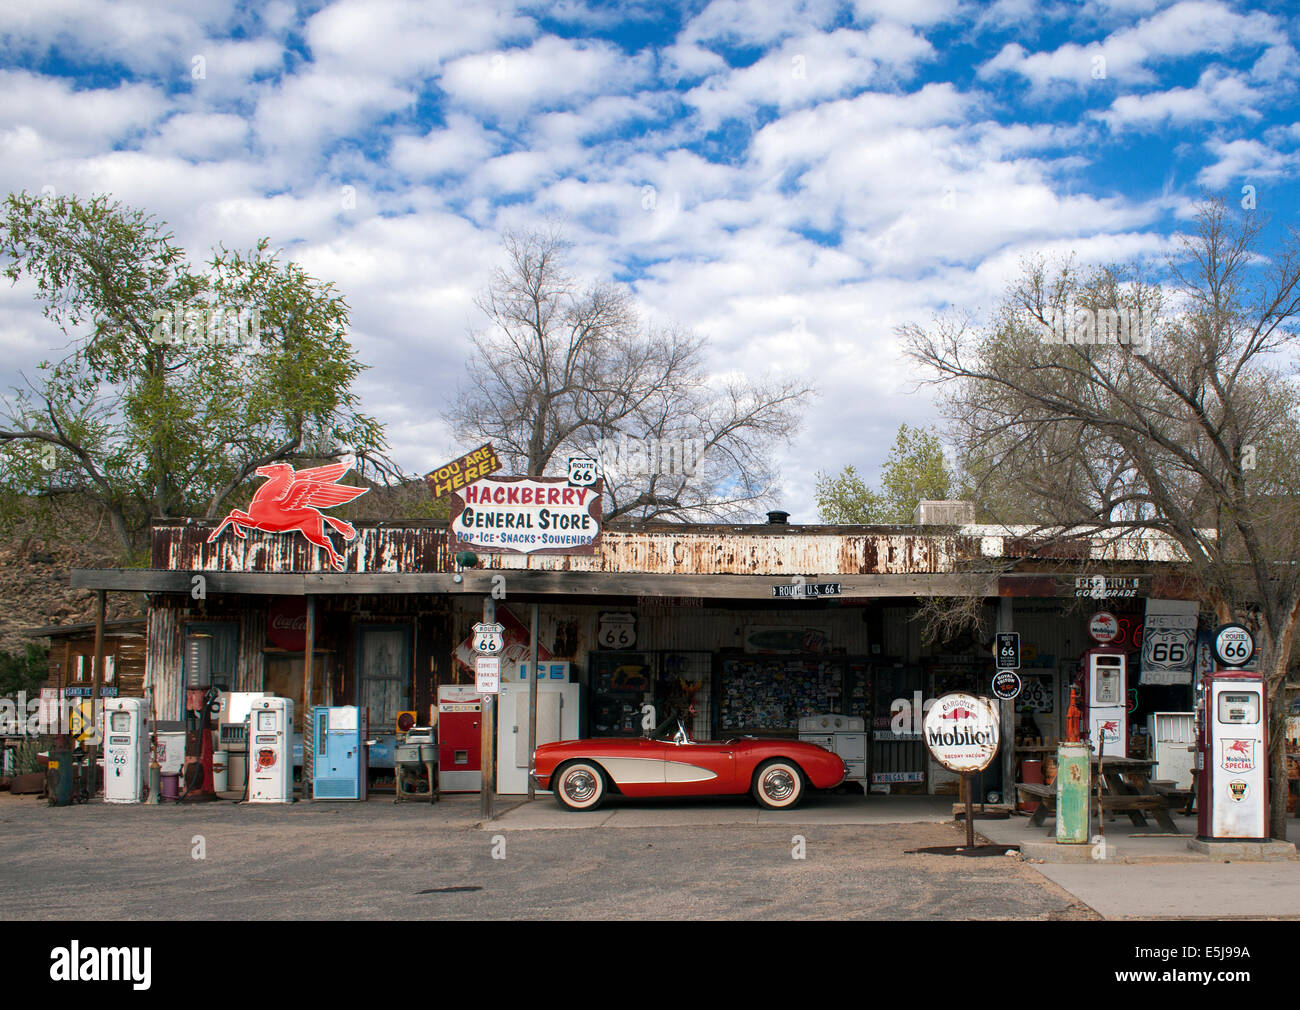 Hackberry General Store in Arizona on old Route 66 Stock Photo